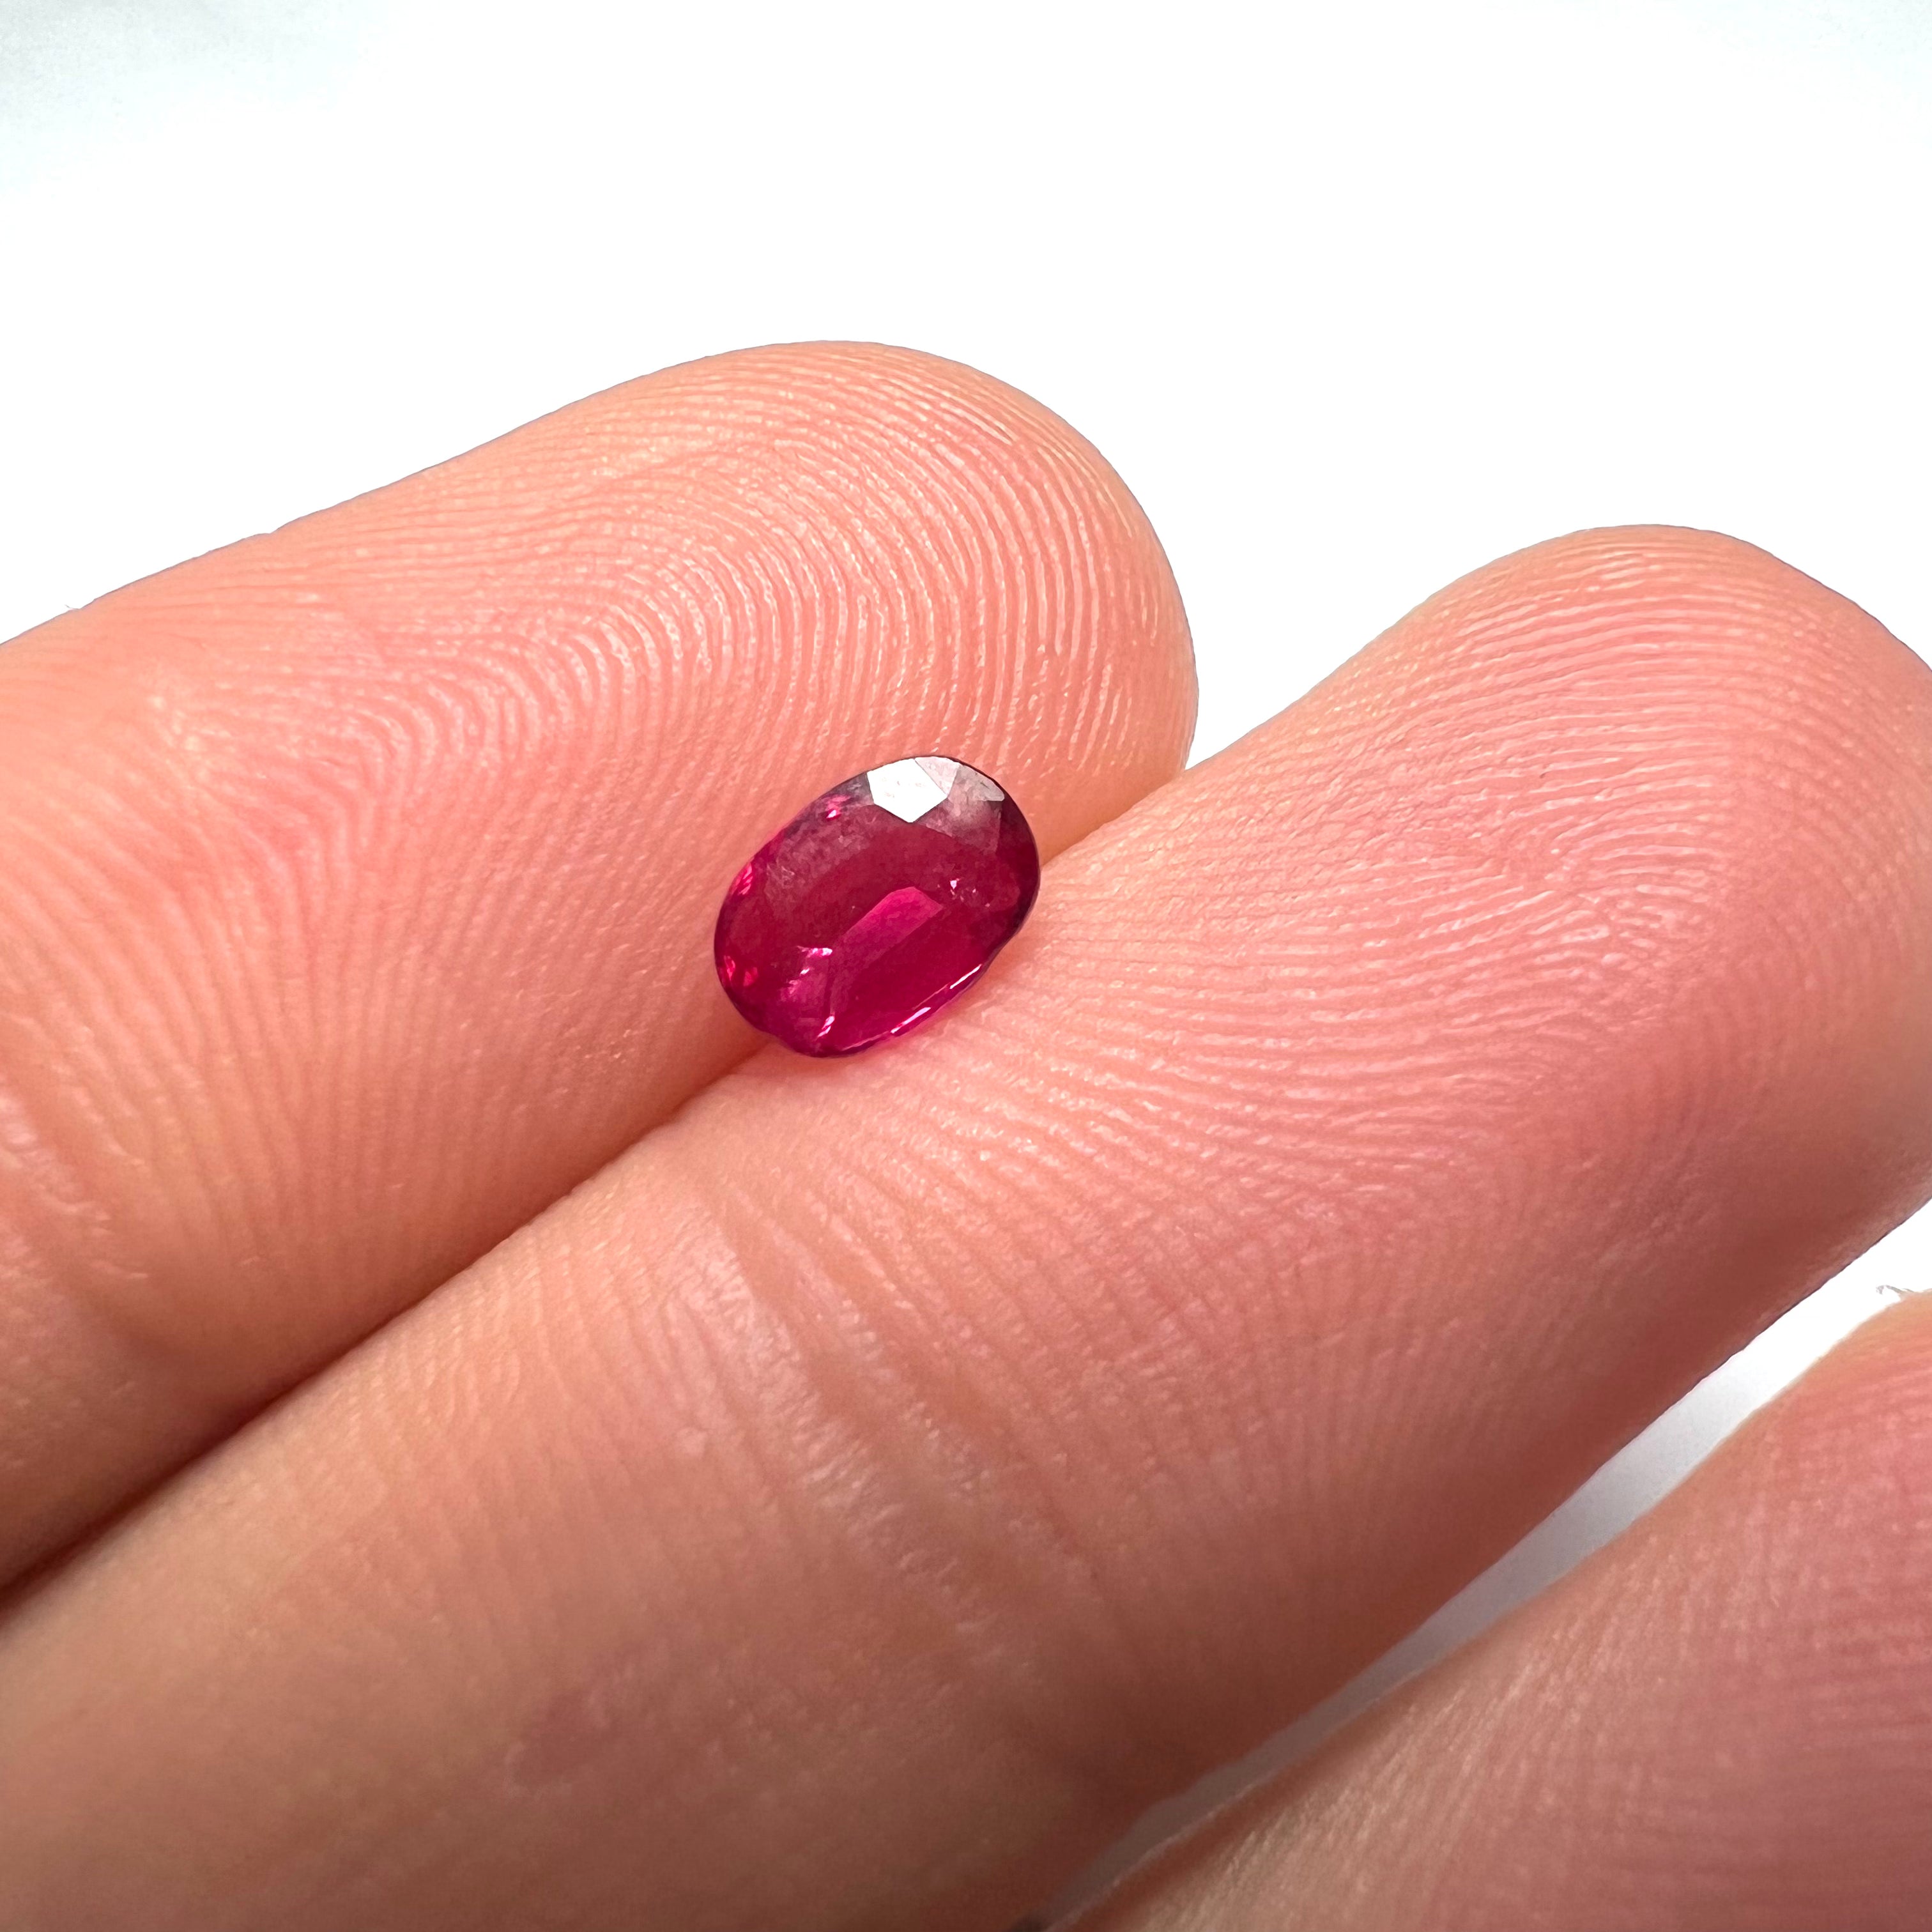 .64CT Loose Natural Oval Ruby 6.2x4x2mm Earth mined Gemstone